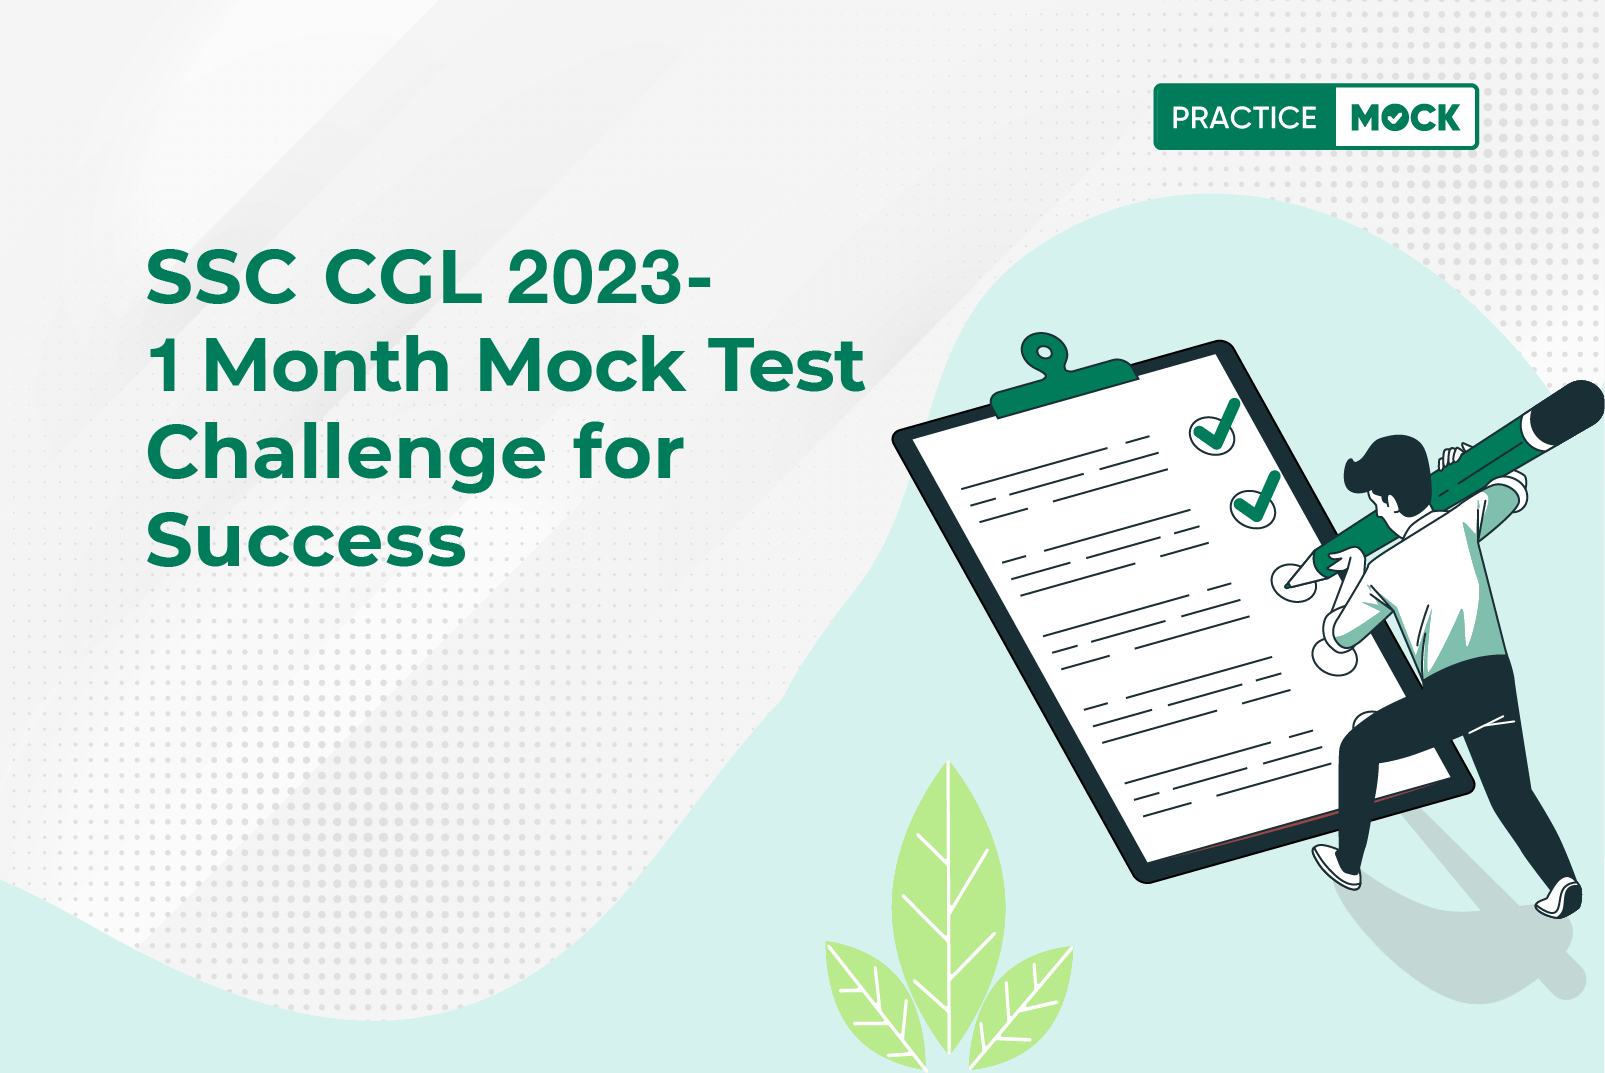 SSC CGL 2023-1 Month Mock Test Challenge for Success